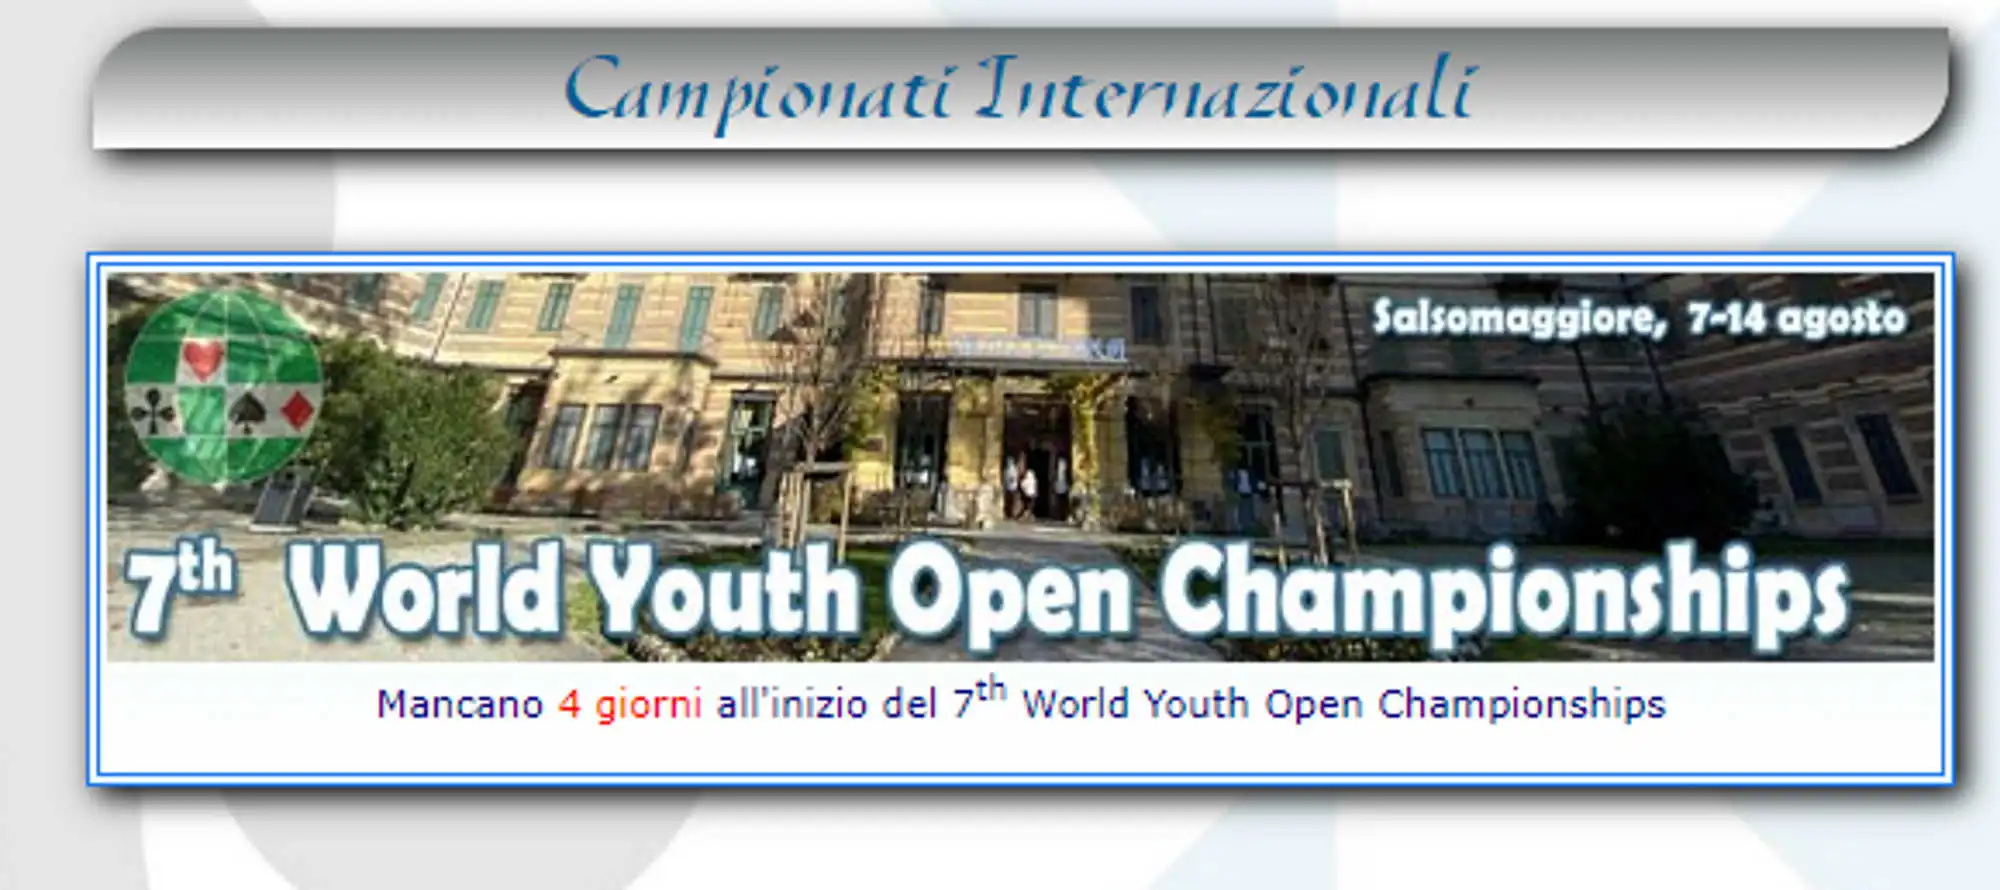 7 World Youth Open Championships